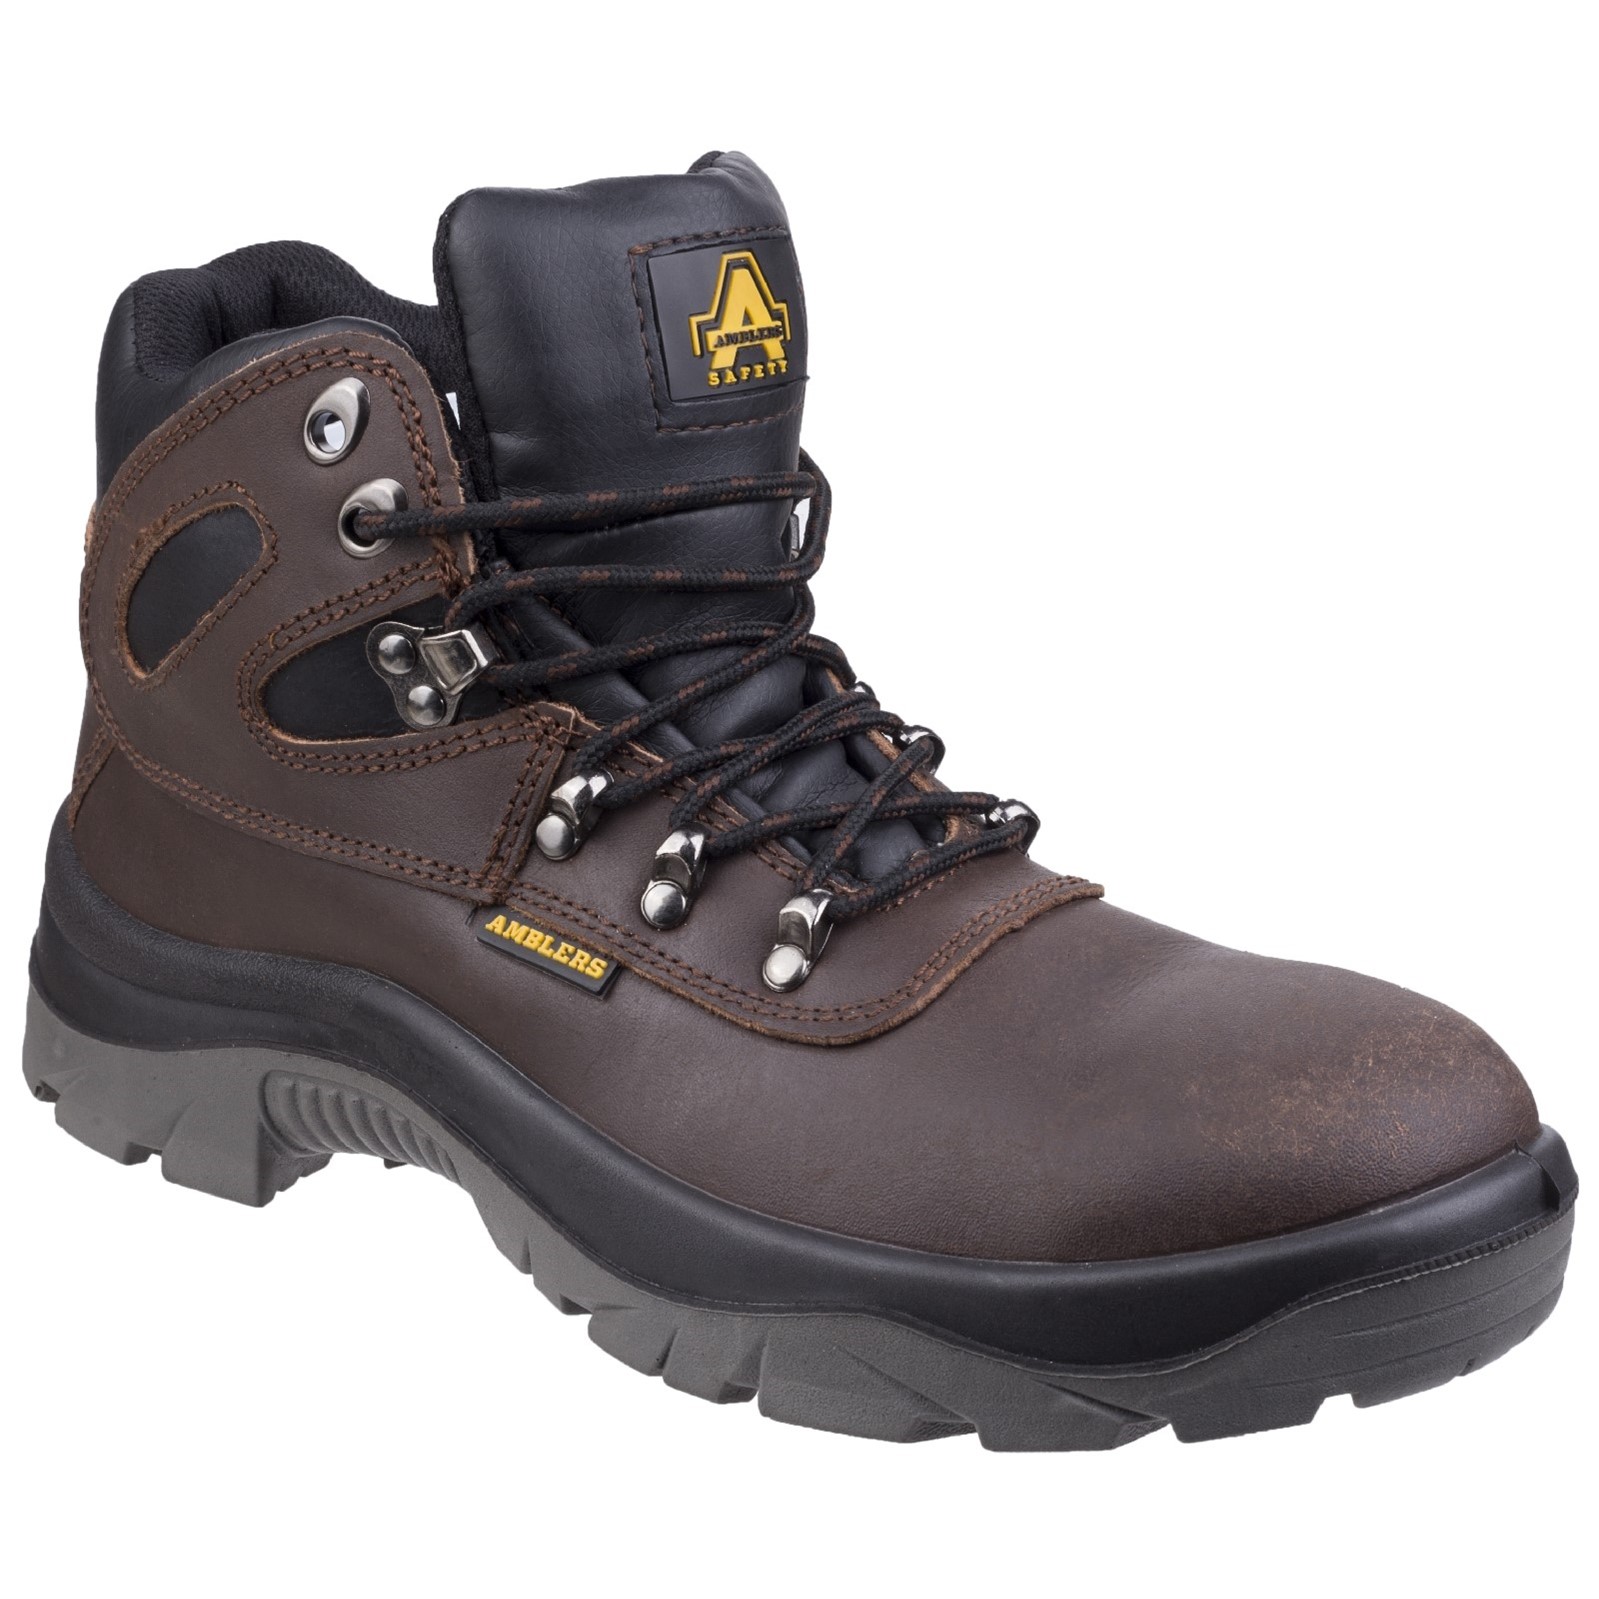 AS253 Water Resistant Full Grain Leather Safety Boot